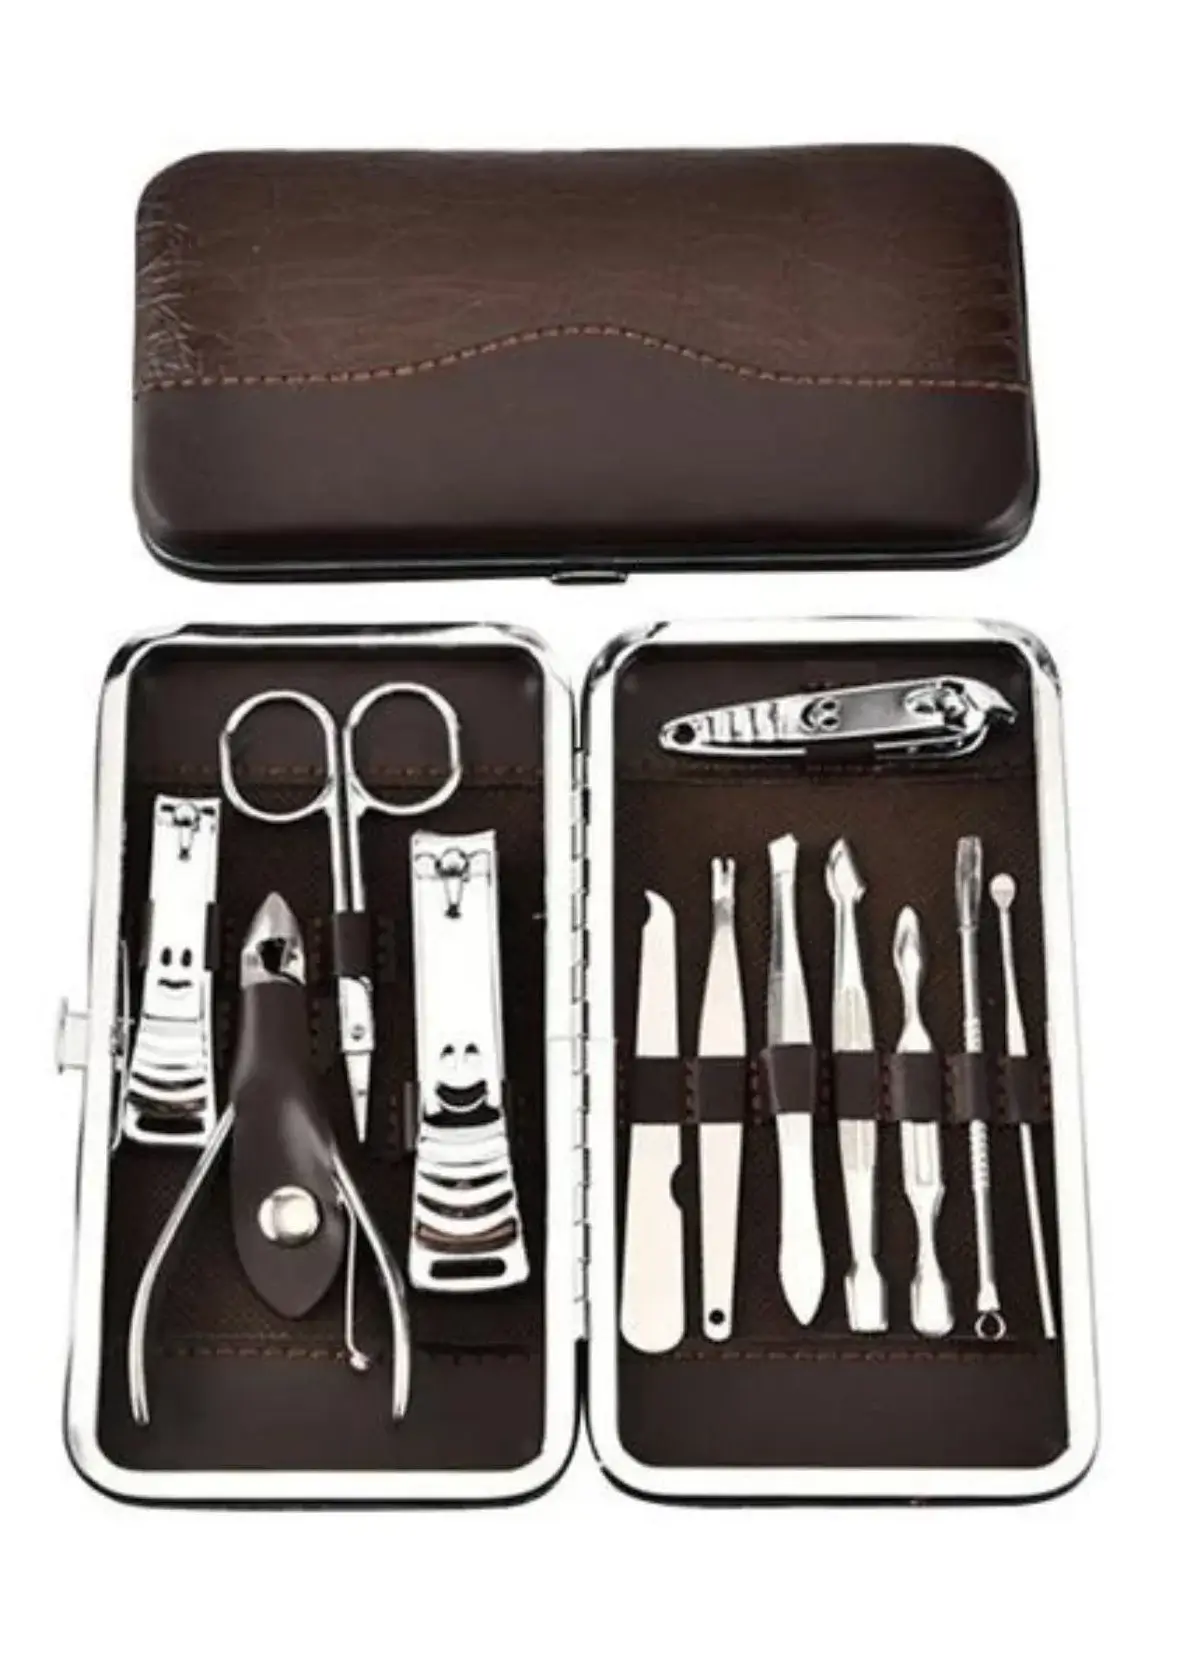 How to choose the best manicure set?